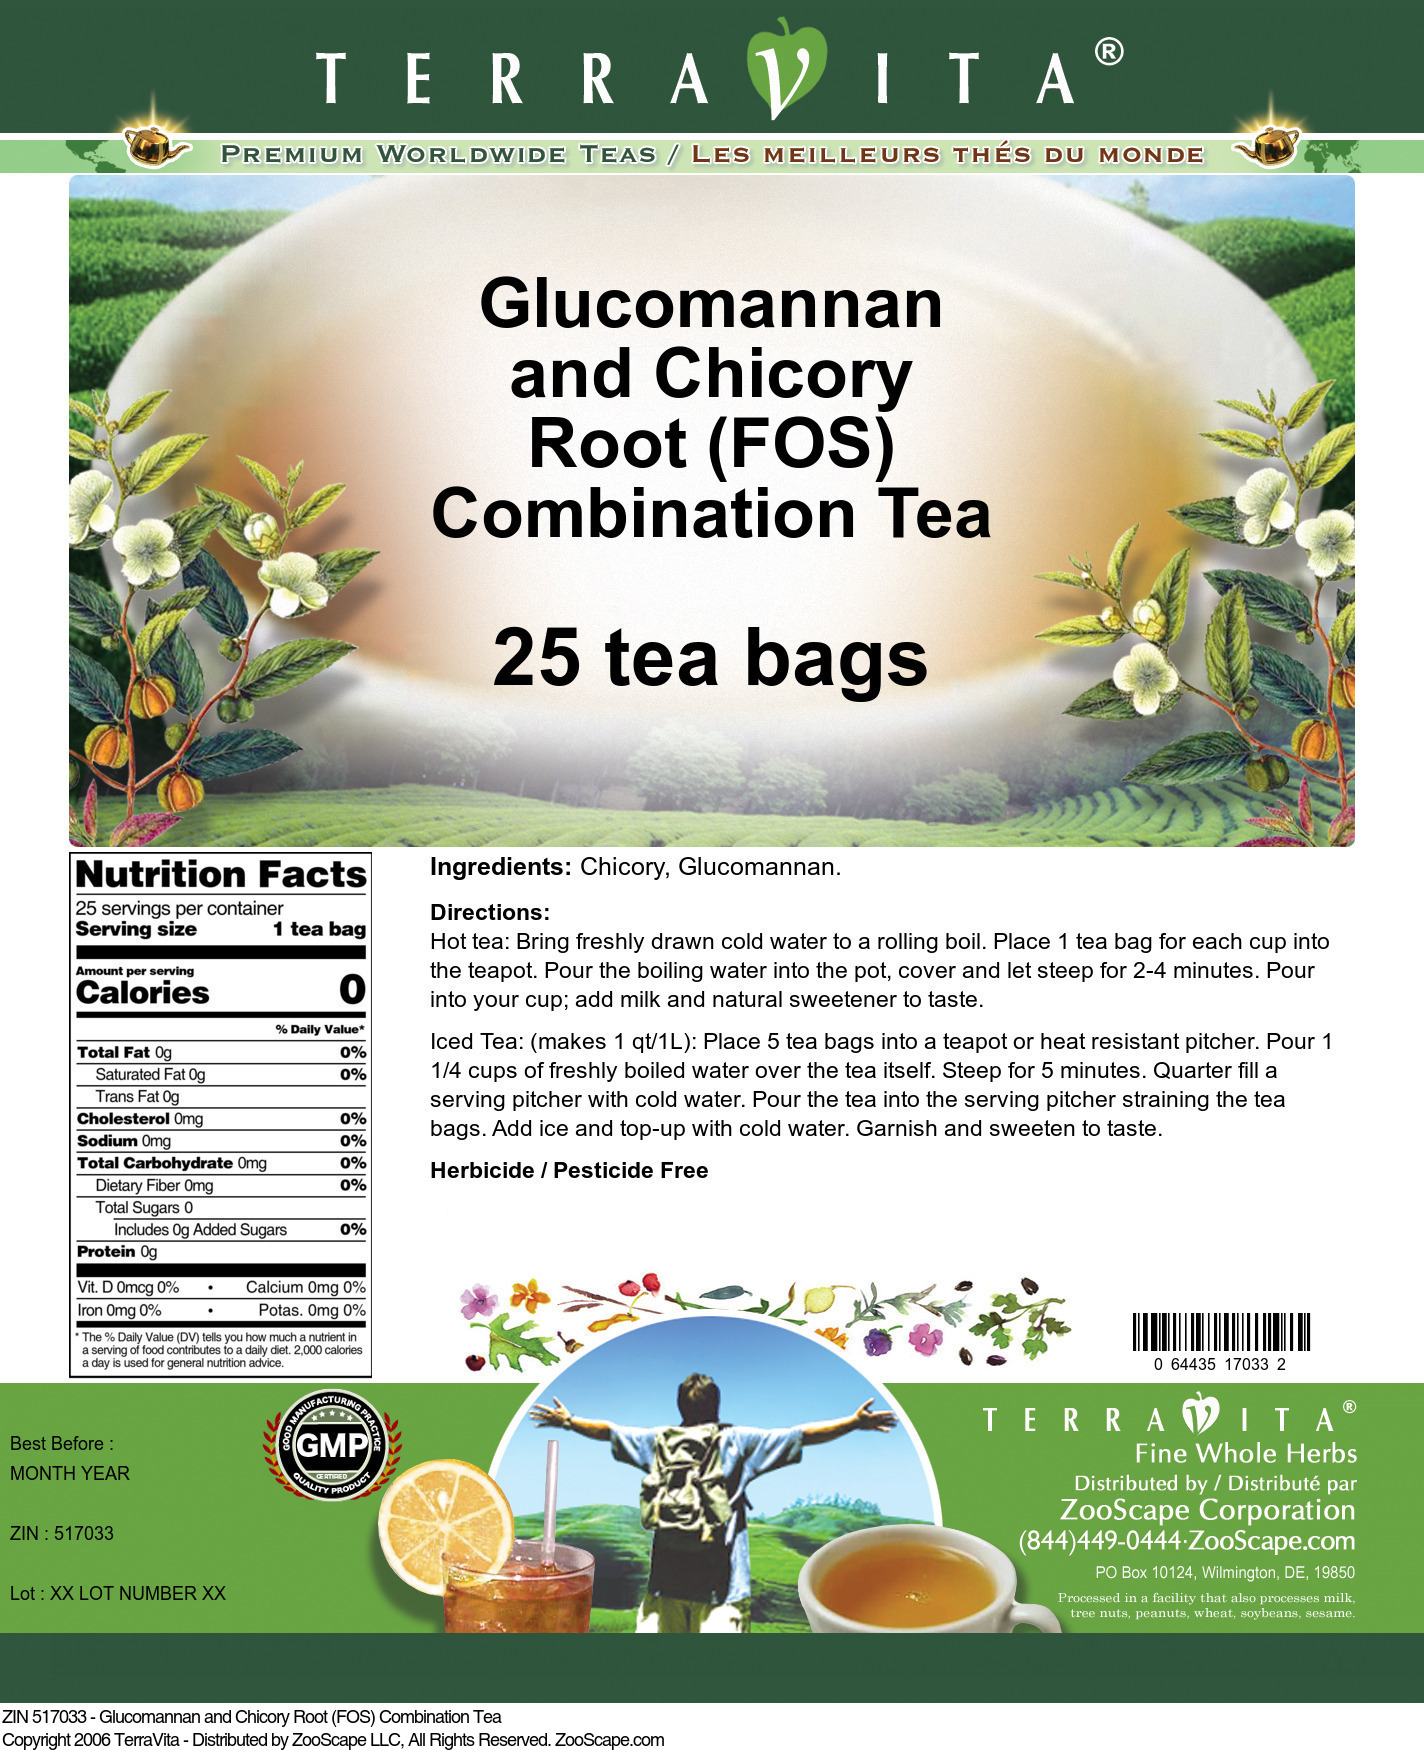 Glucomannan and Chicory Root (FOS) Combination Tea - Label